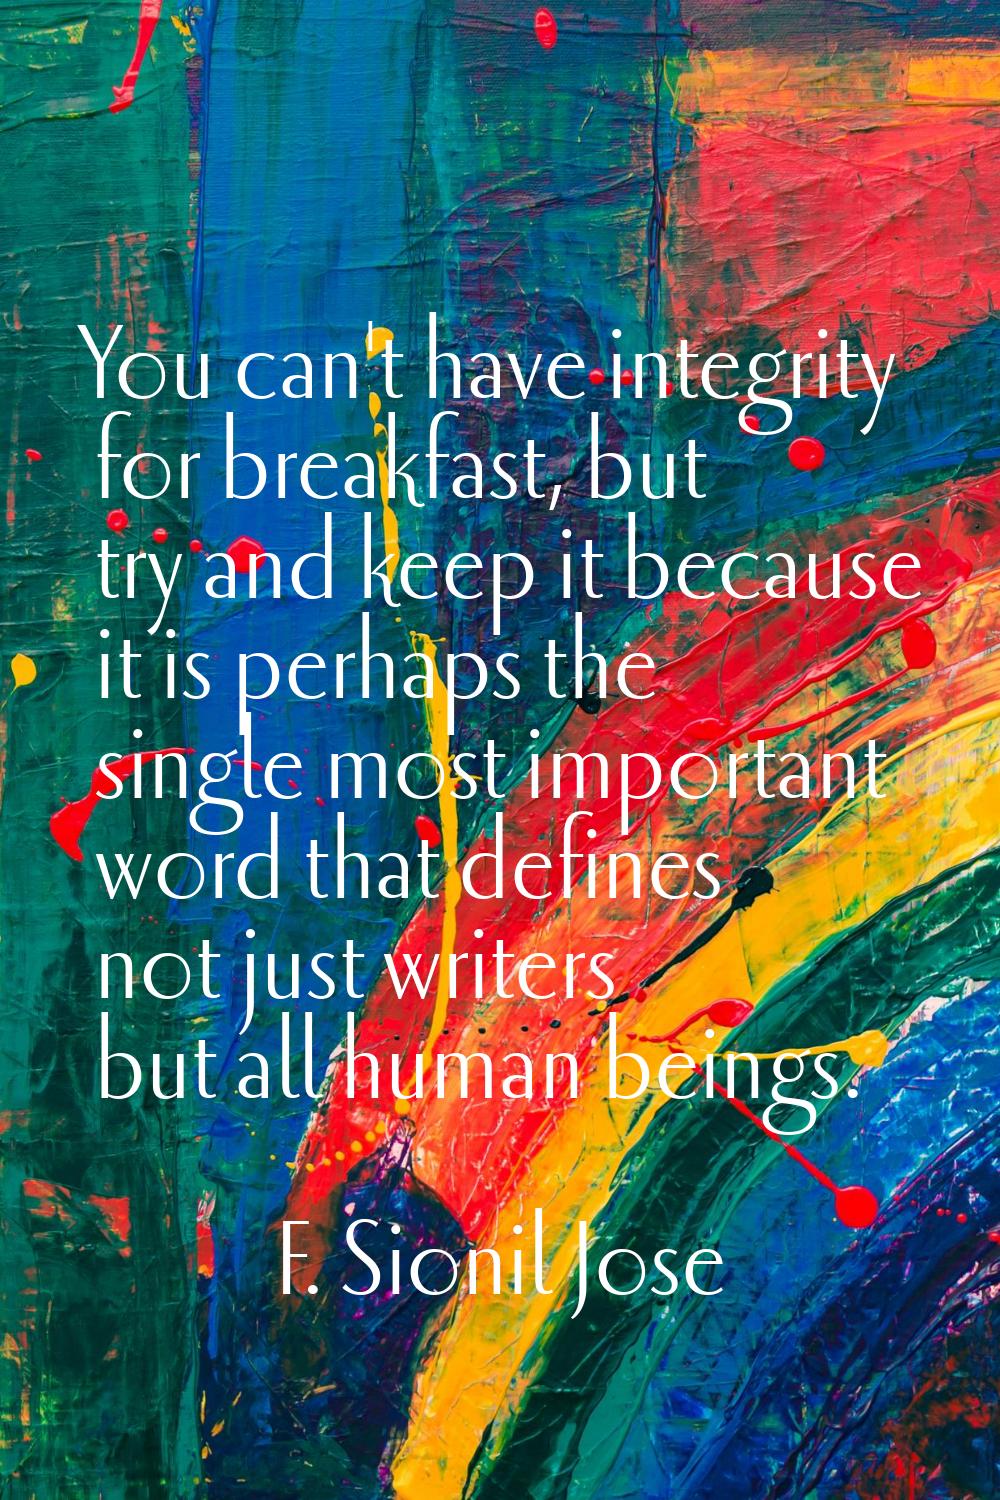 You can't have integrity for breakfast, but try and keep it because it is perhaps the single most i